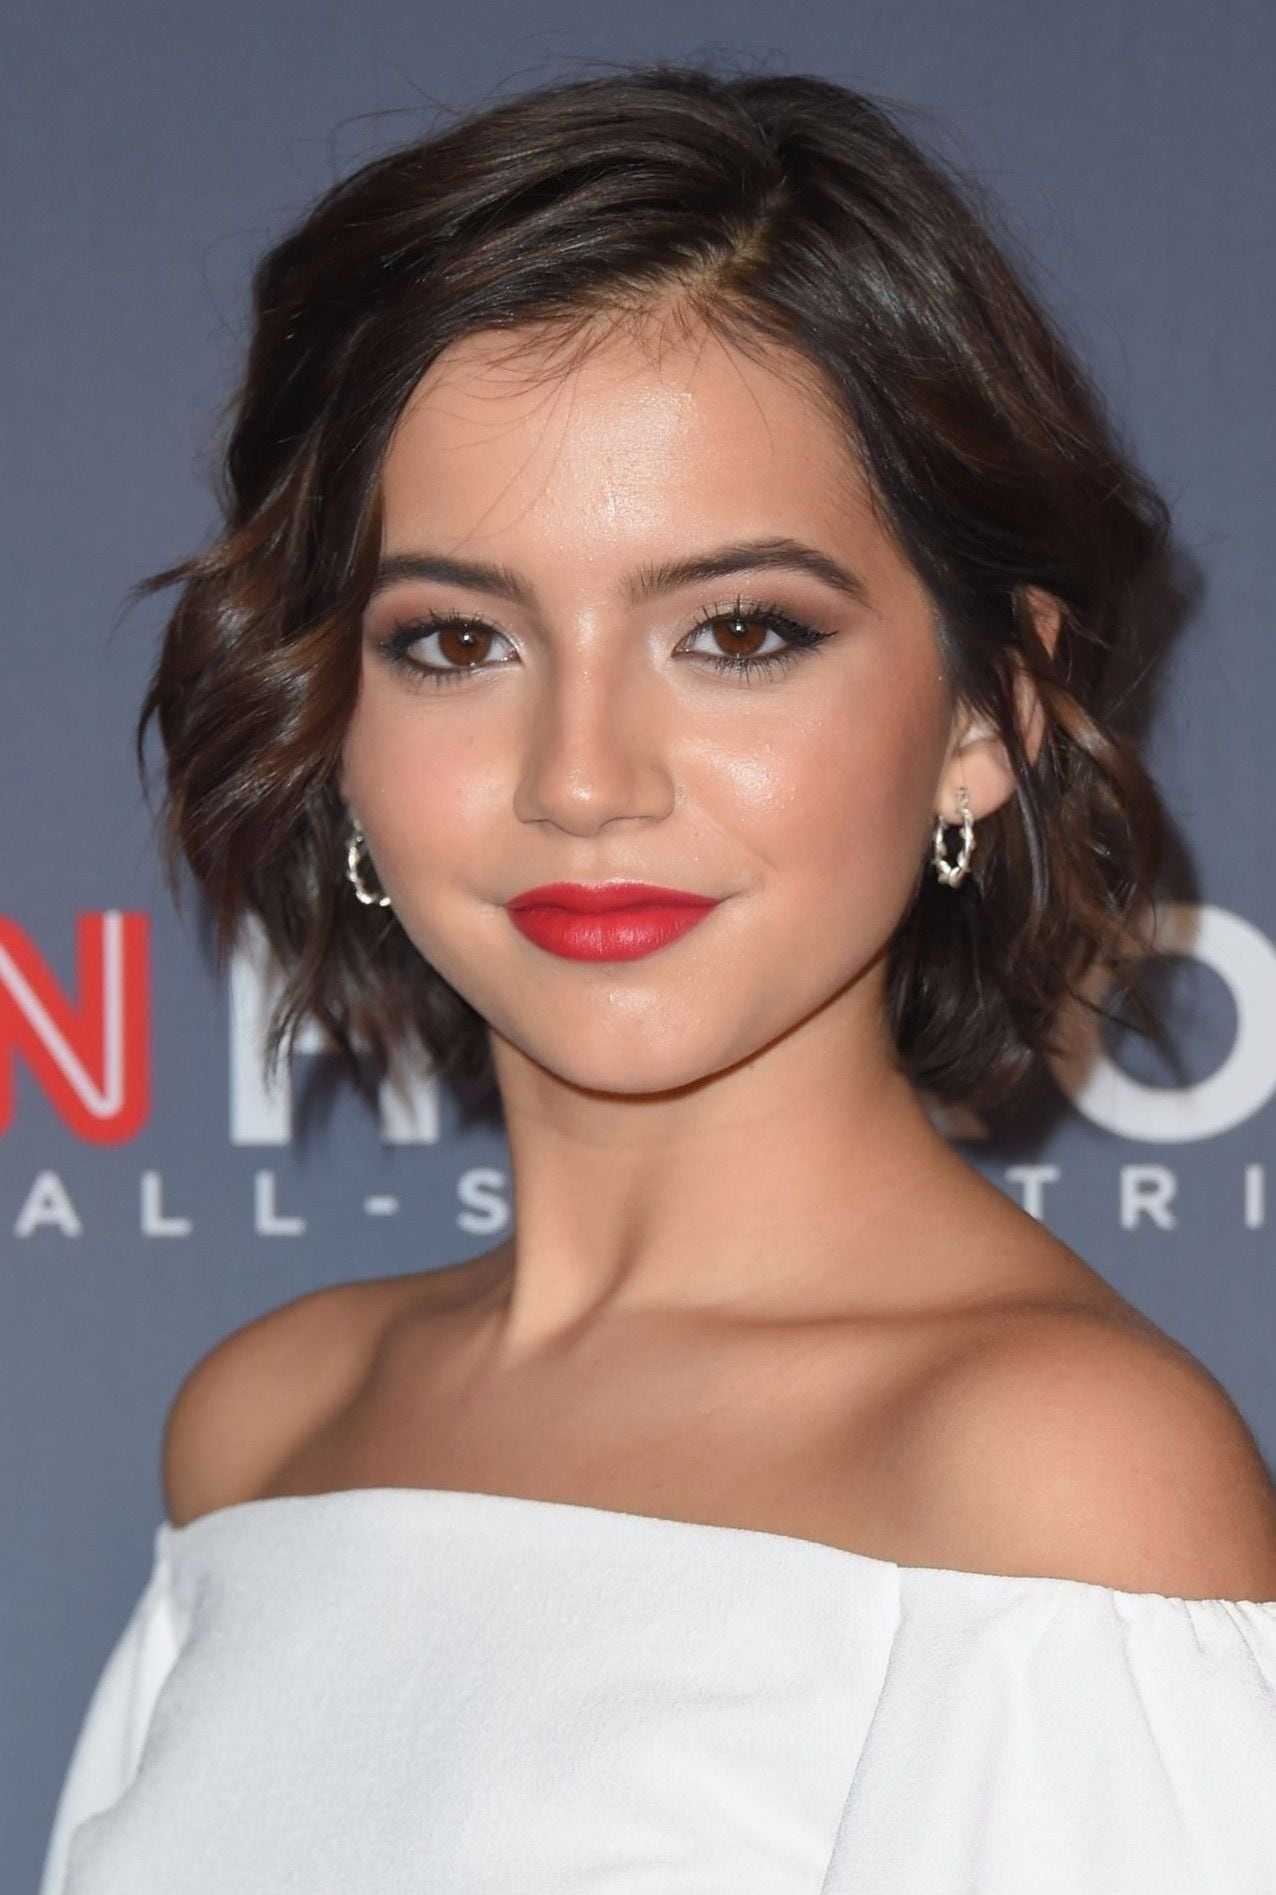 70+ Hot Pictures Of Isabela Moner Which Will Rock Your World 10